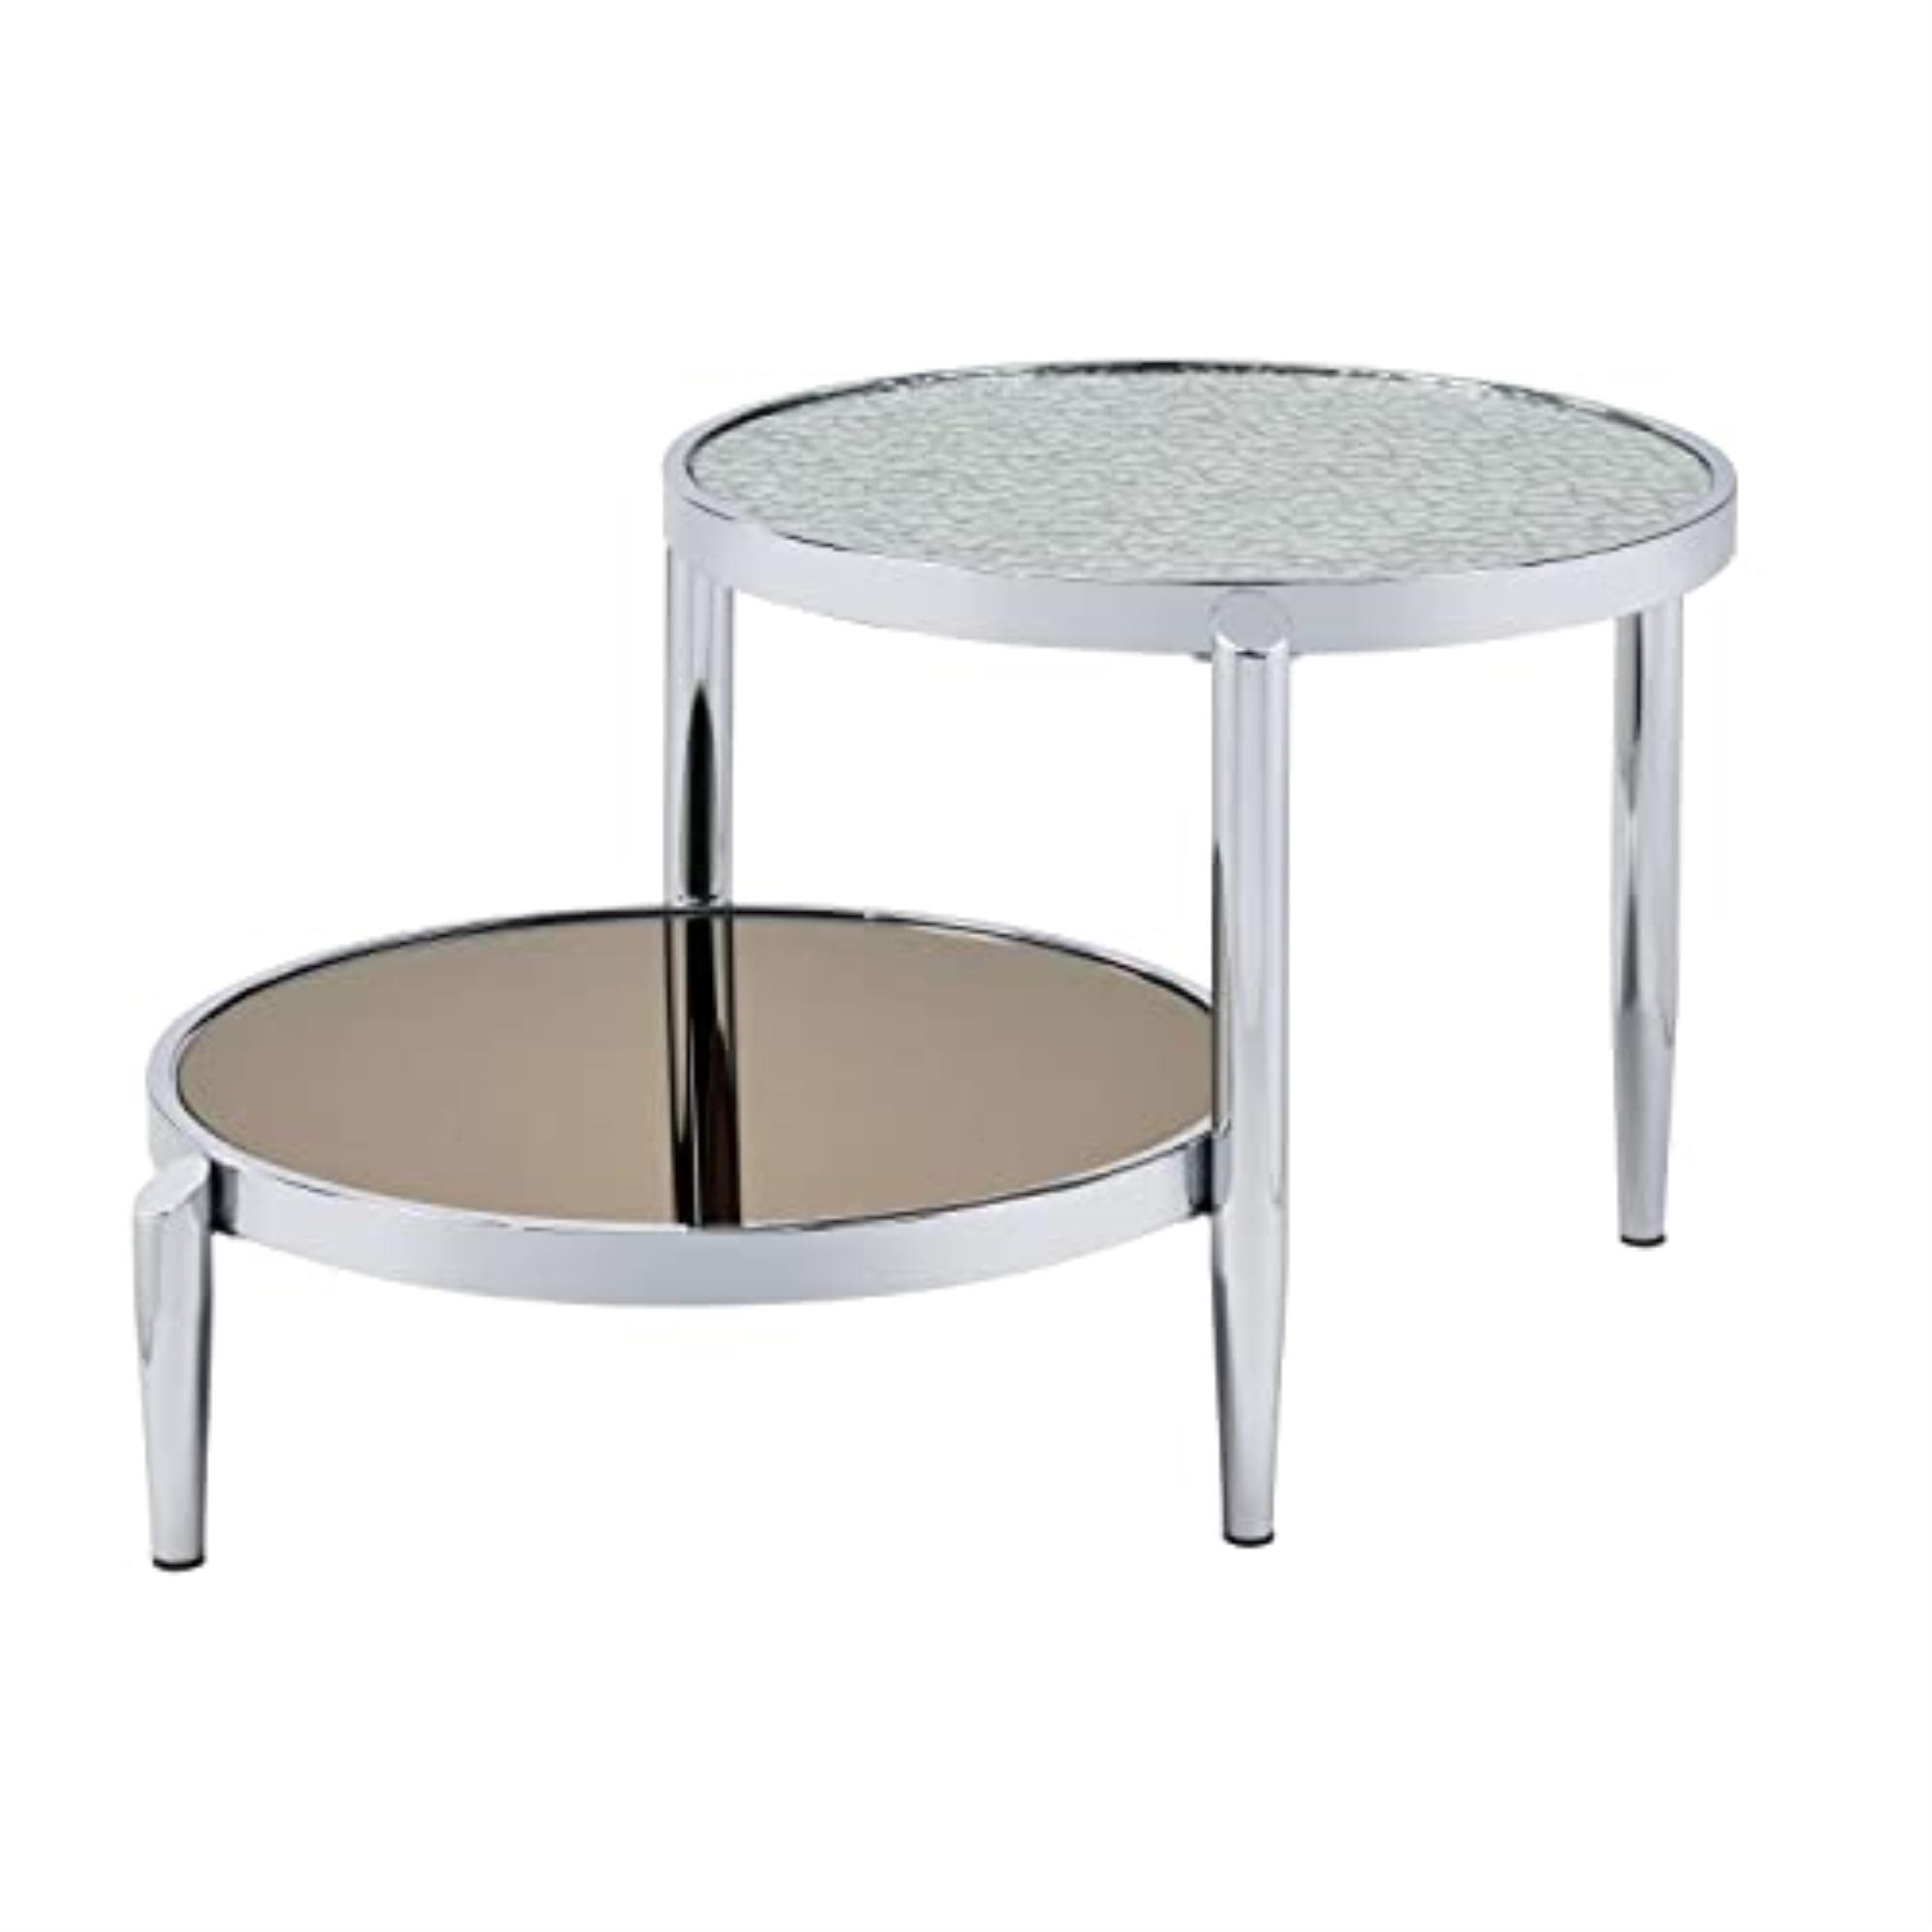 Chic 37" Chrome Round Nesting Coffee Table with Mirrored Glass